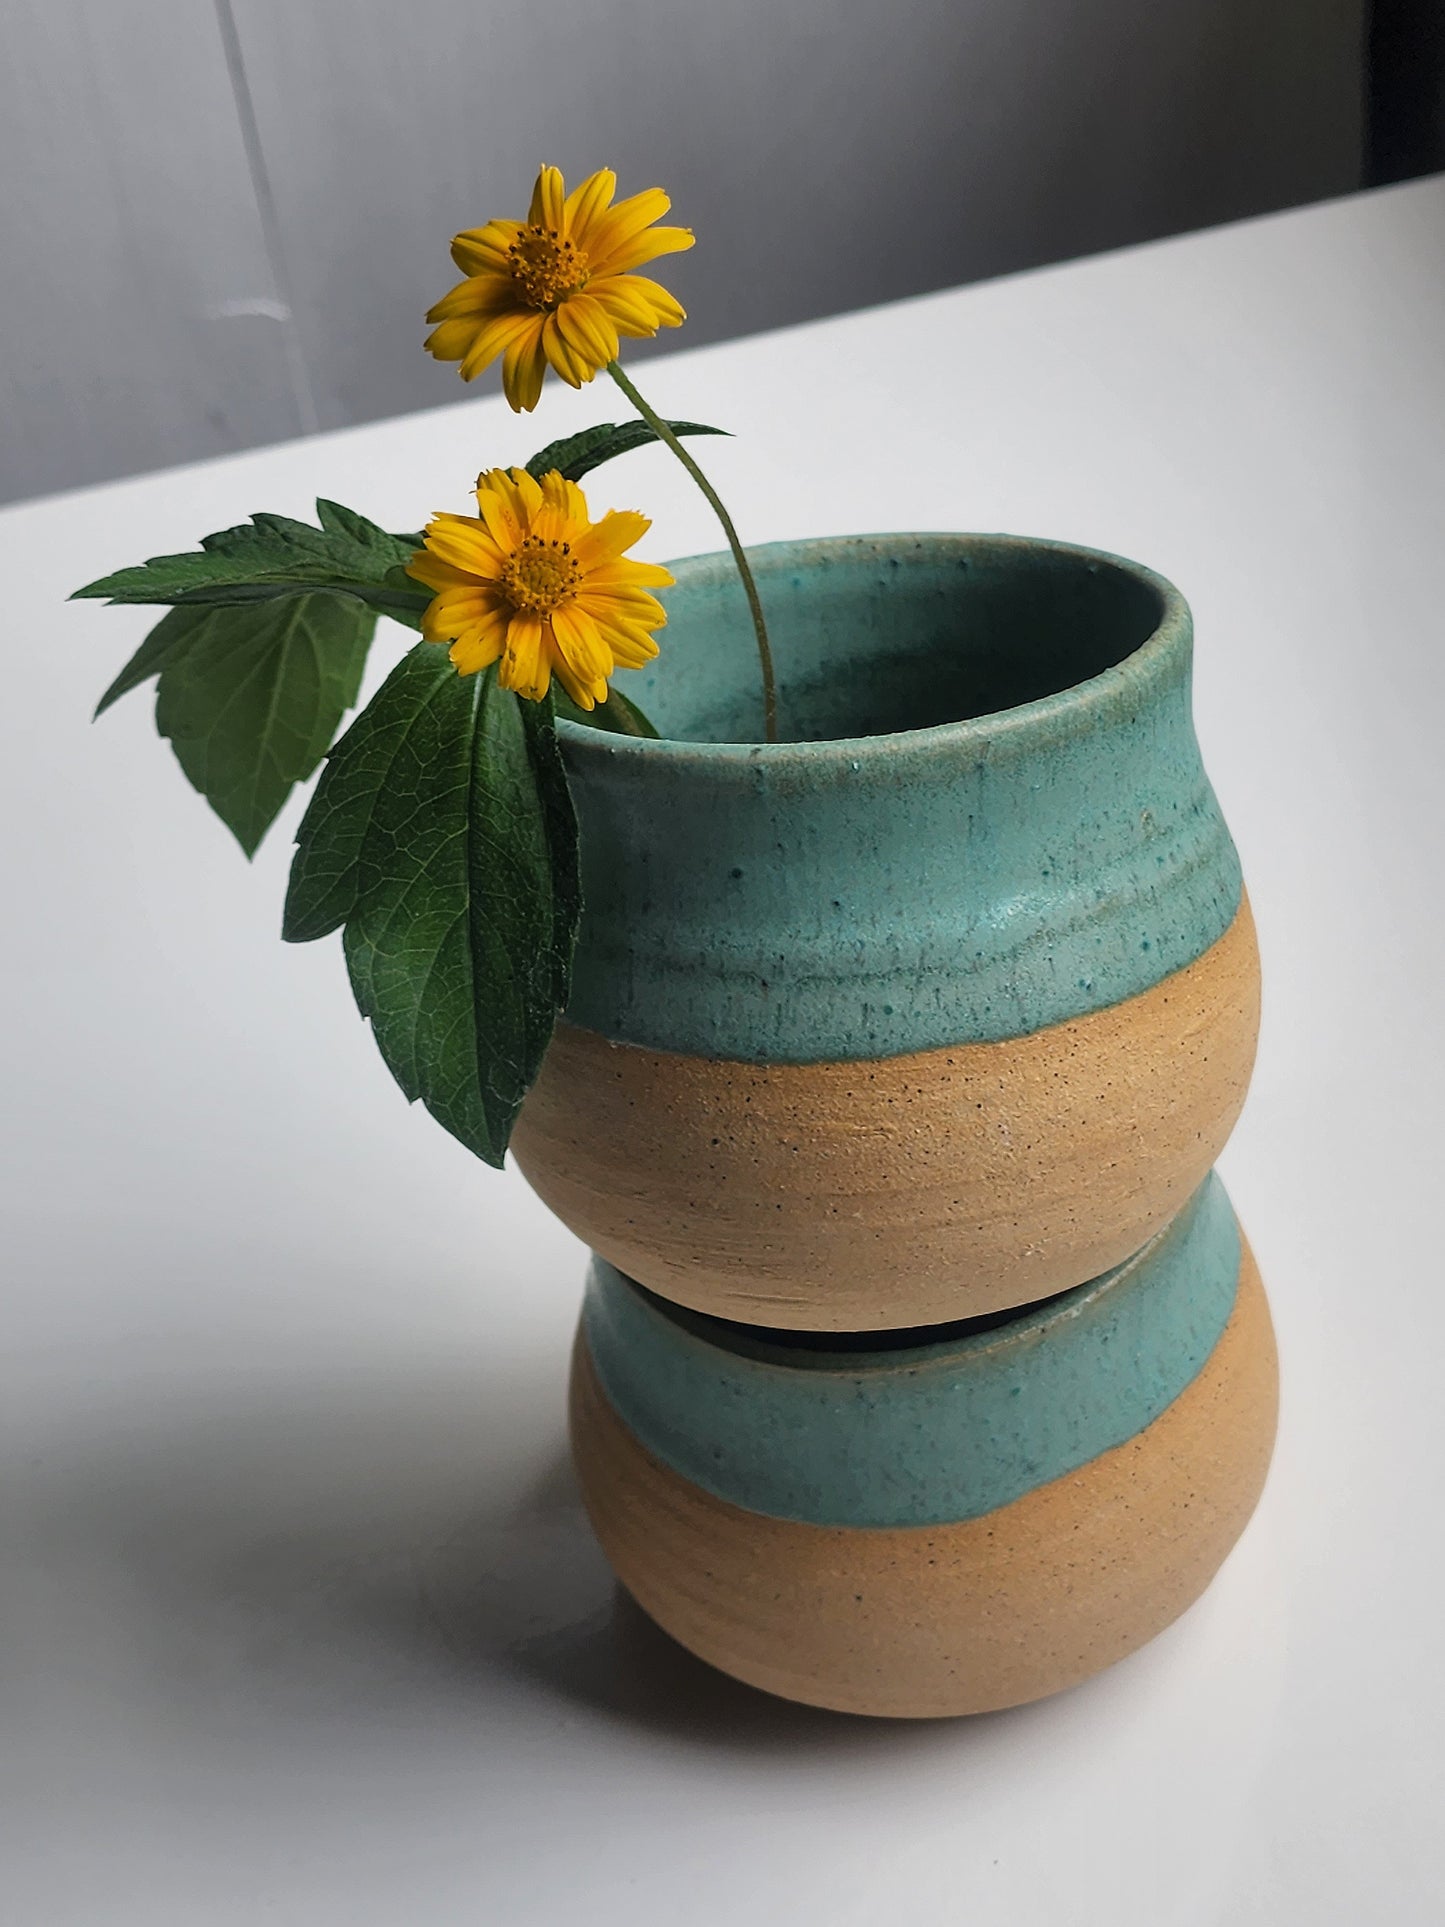 Turquoise Clay Vessel